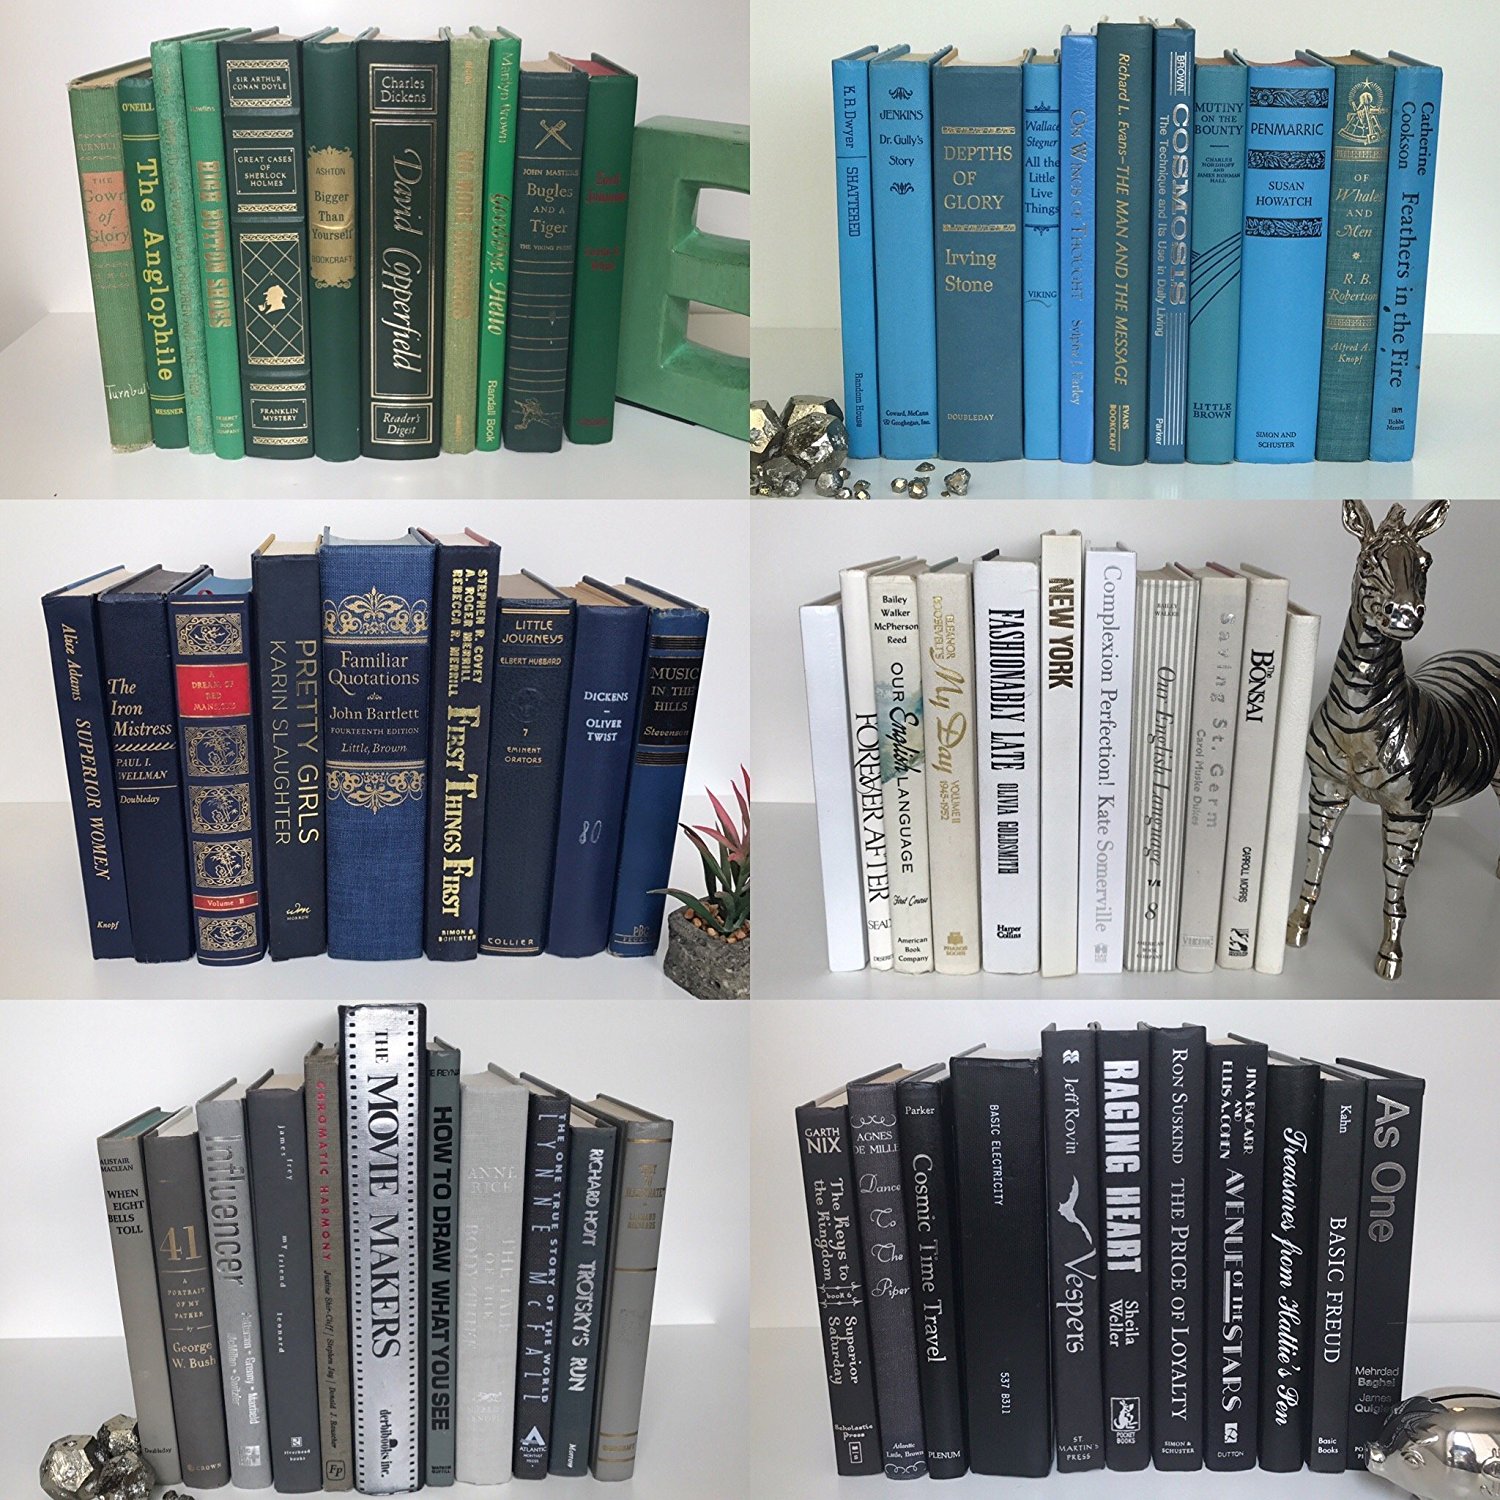 Create the illusion that you are well-read by ordering cheap bundles of attractive books to fill your shelves.</br>A custom arrangement of <a href="https://amzn.to/2rKXPEm">decorative vintage books</a> will start at six bucks.